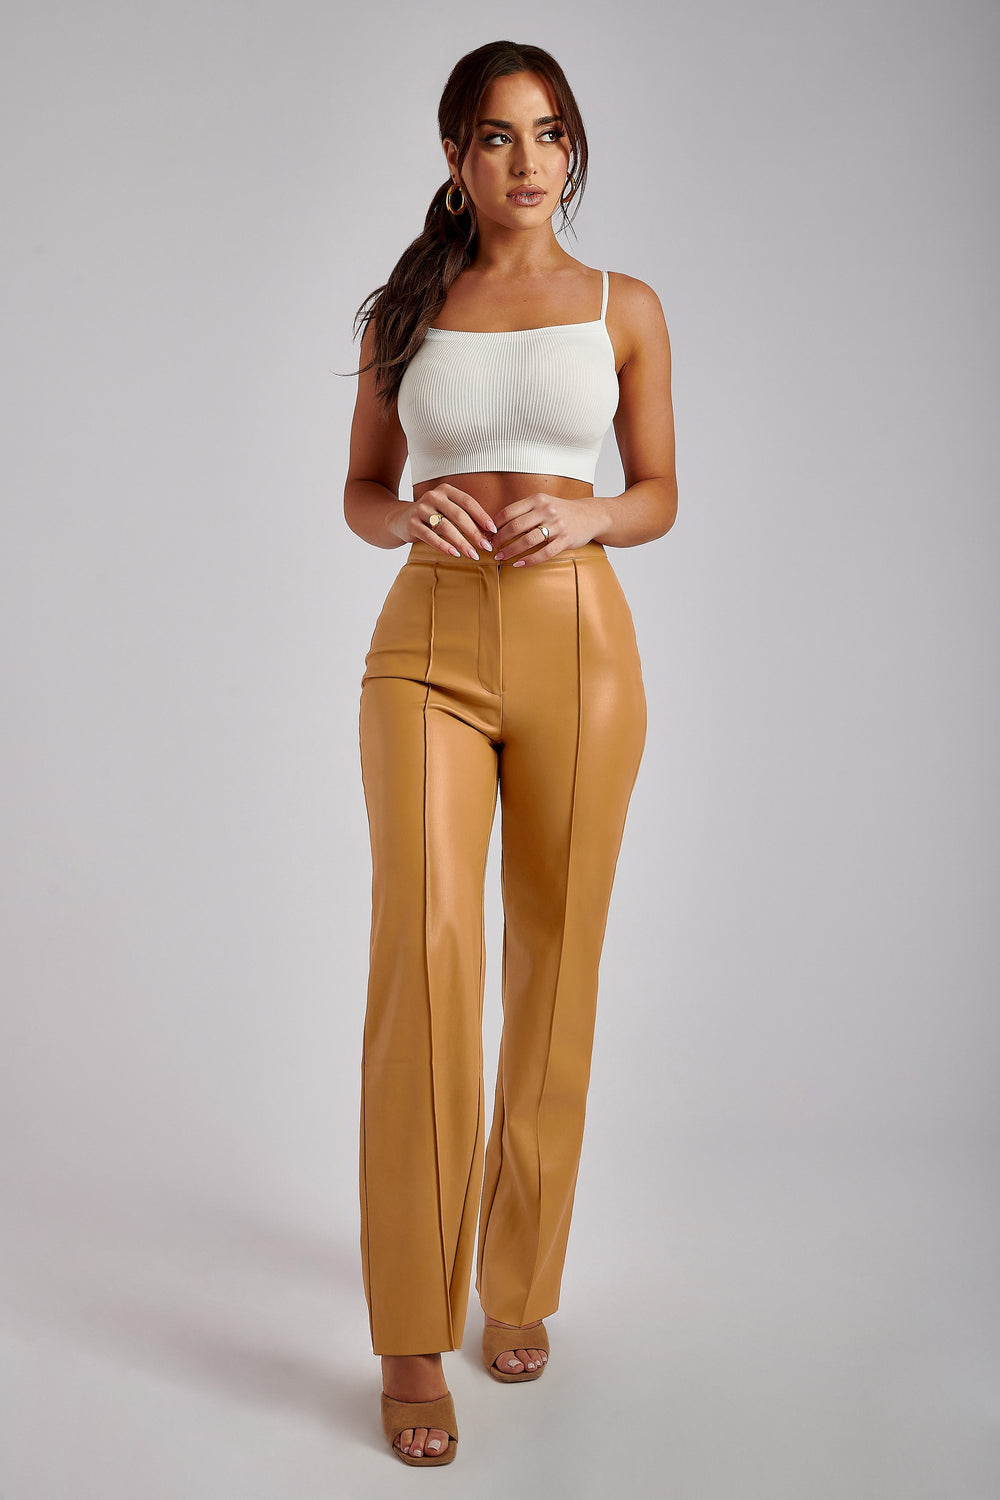 Scout Faux Leather Piped Pants - Tan